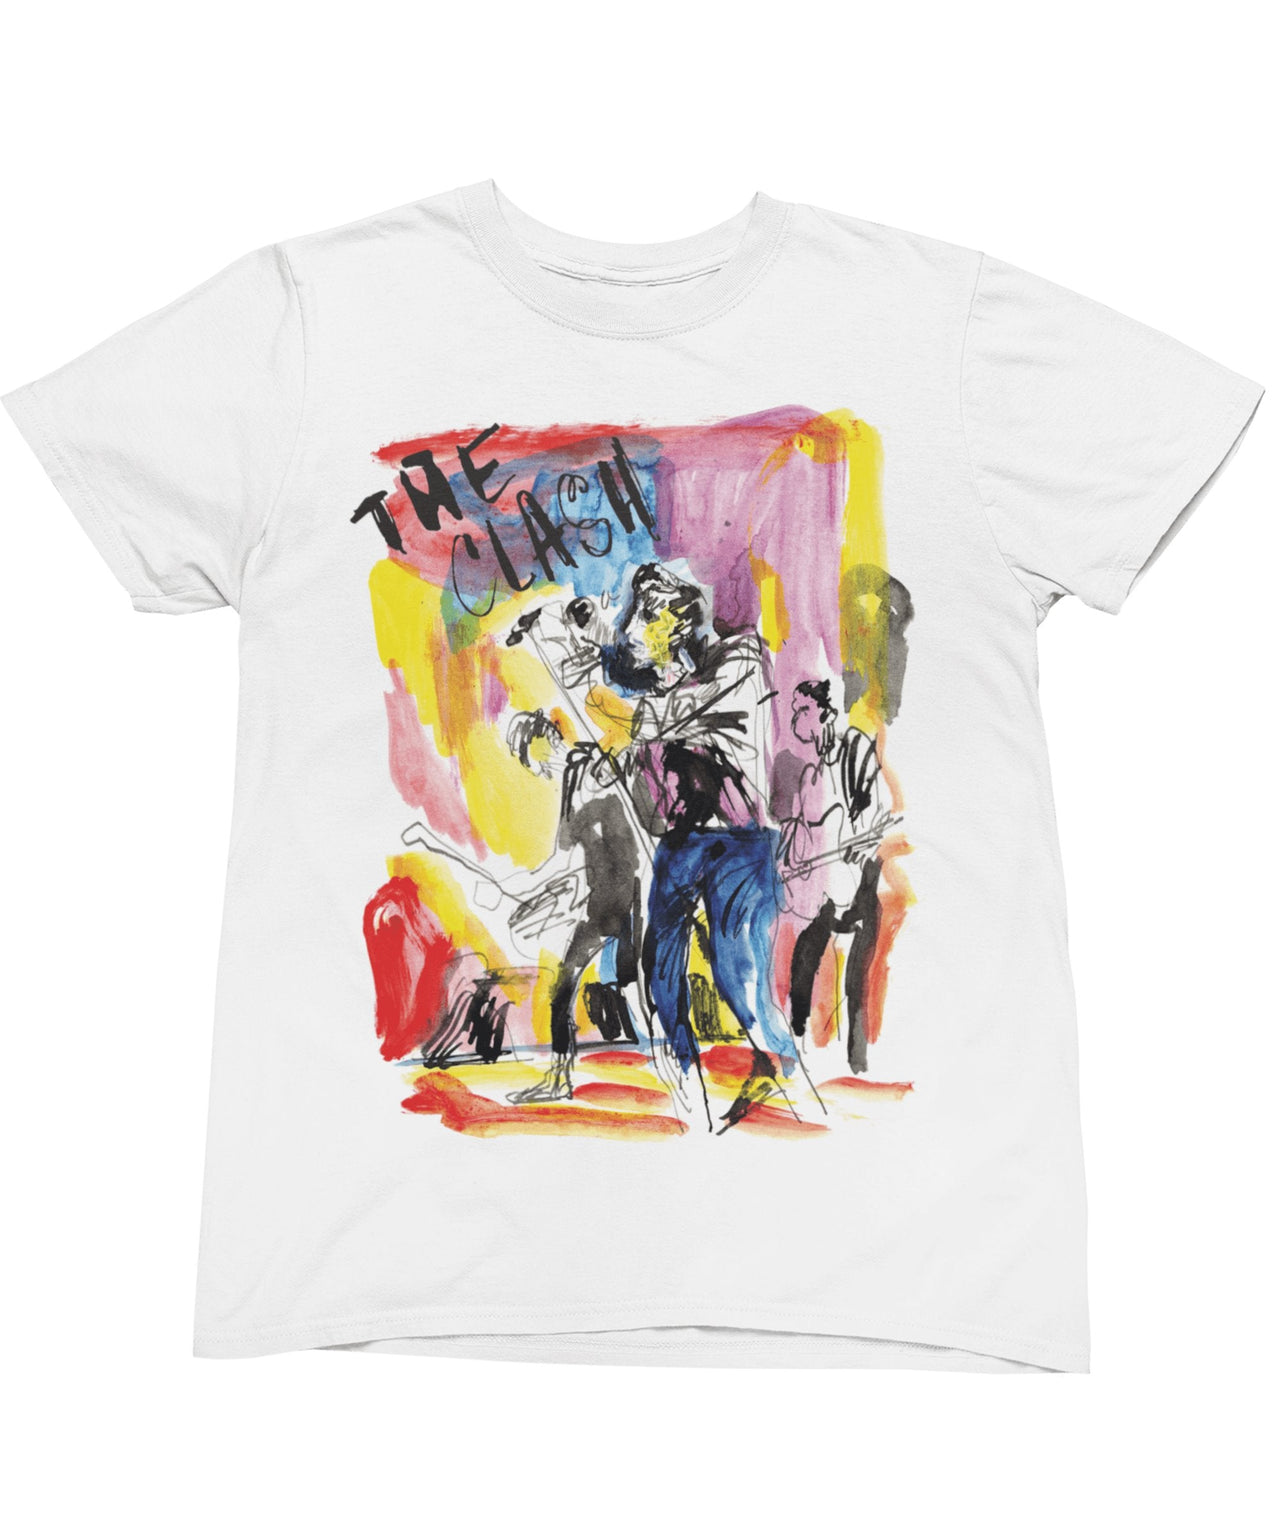 The Clash On Tour Band On Stage 2 T-Shirt For Men 8Ball